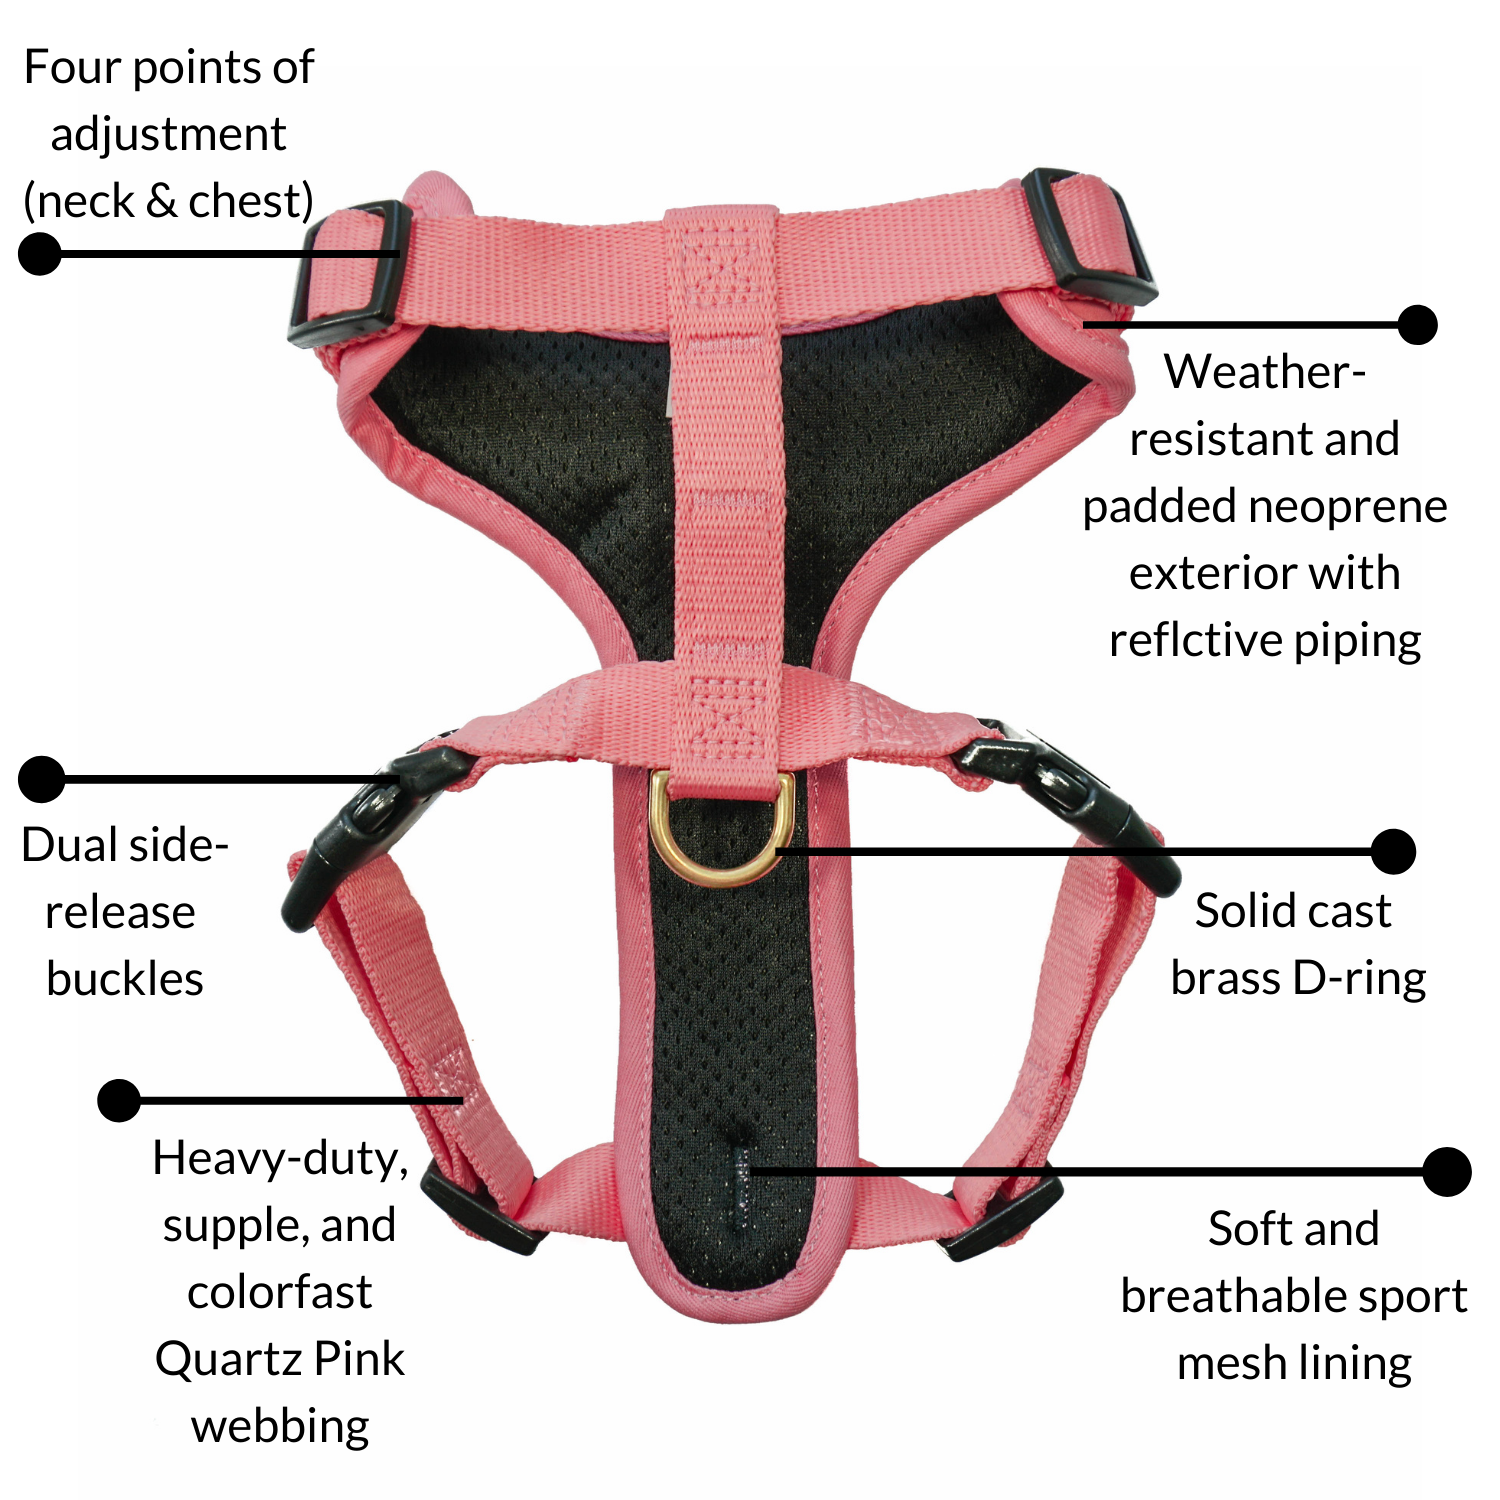 DJANGO's Adventure Cat Harness features a water-resistant and durable neoprene exterior, a lightweight and padded cat harness body, super soft custom webbing for max comfort, reflective piping for low light adventures, secure side release buckles for easy on and off, and a beautiful solid cast brass D-ring - djangobrand.com